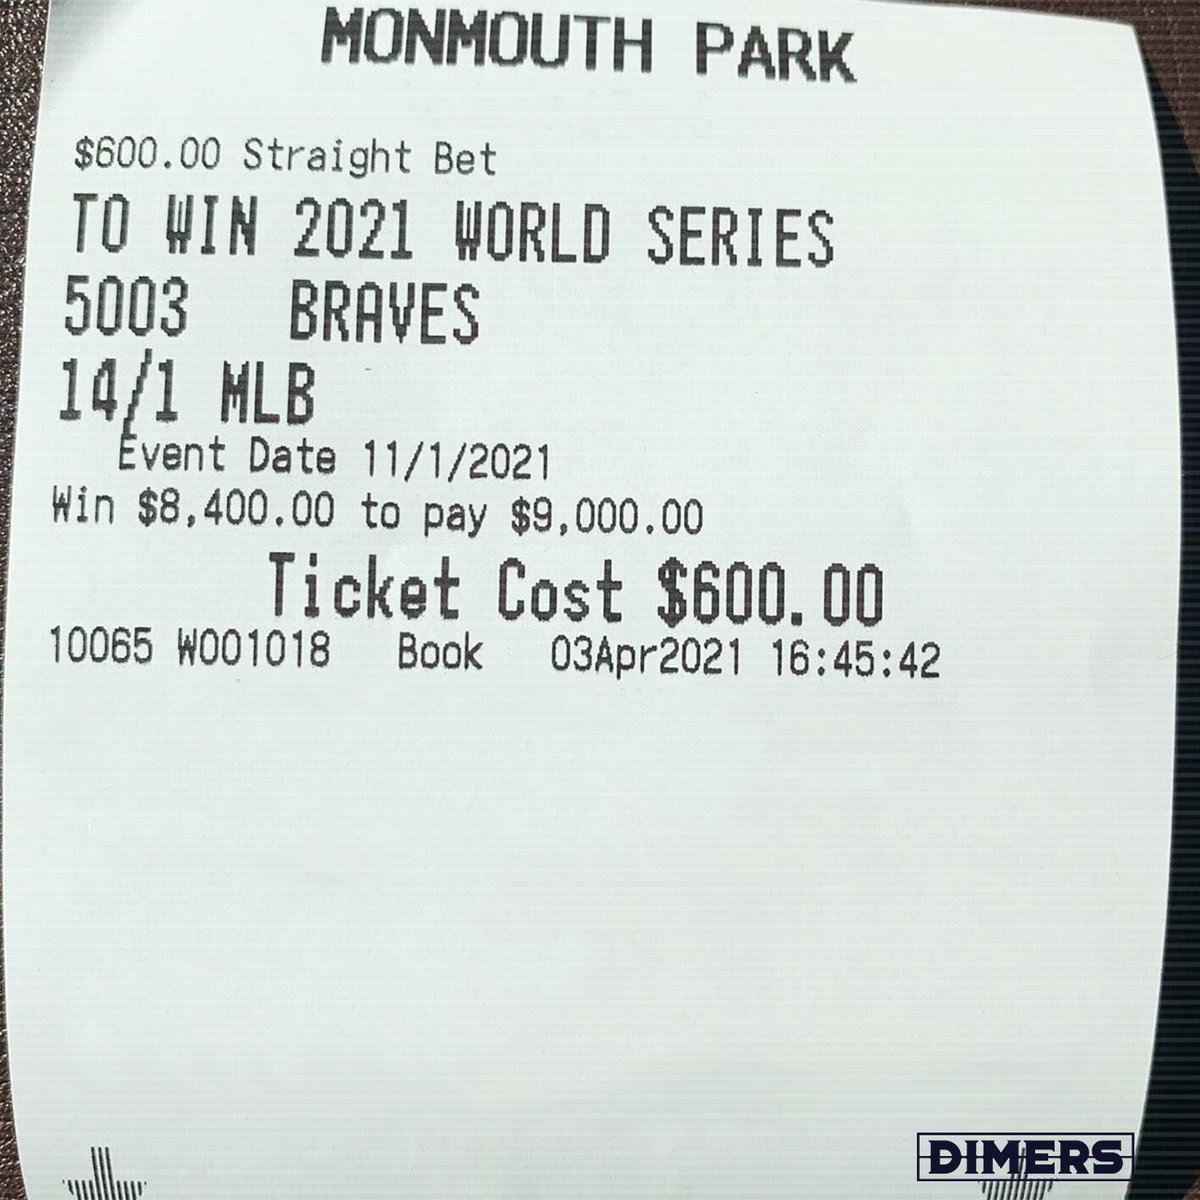 3/7BET 1  Braves World Series WinnerOriginal odds: +1400Current odds: +1500Our pre-season data projections had the Braves with a 12.1% chance of being crowned World Champs. Now, they’re still ranked as second most likely to win, at 11.4%. Payout: $8400